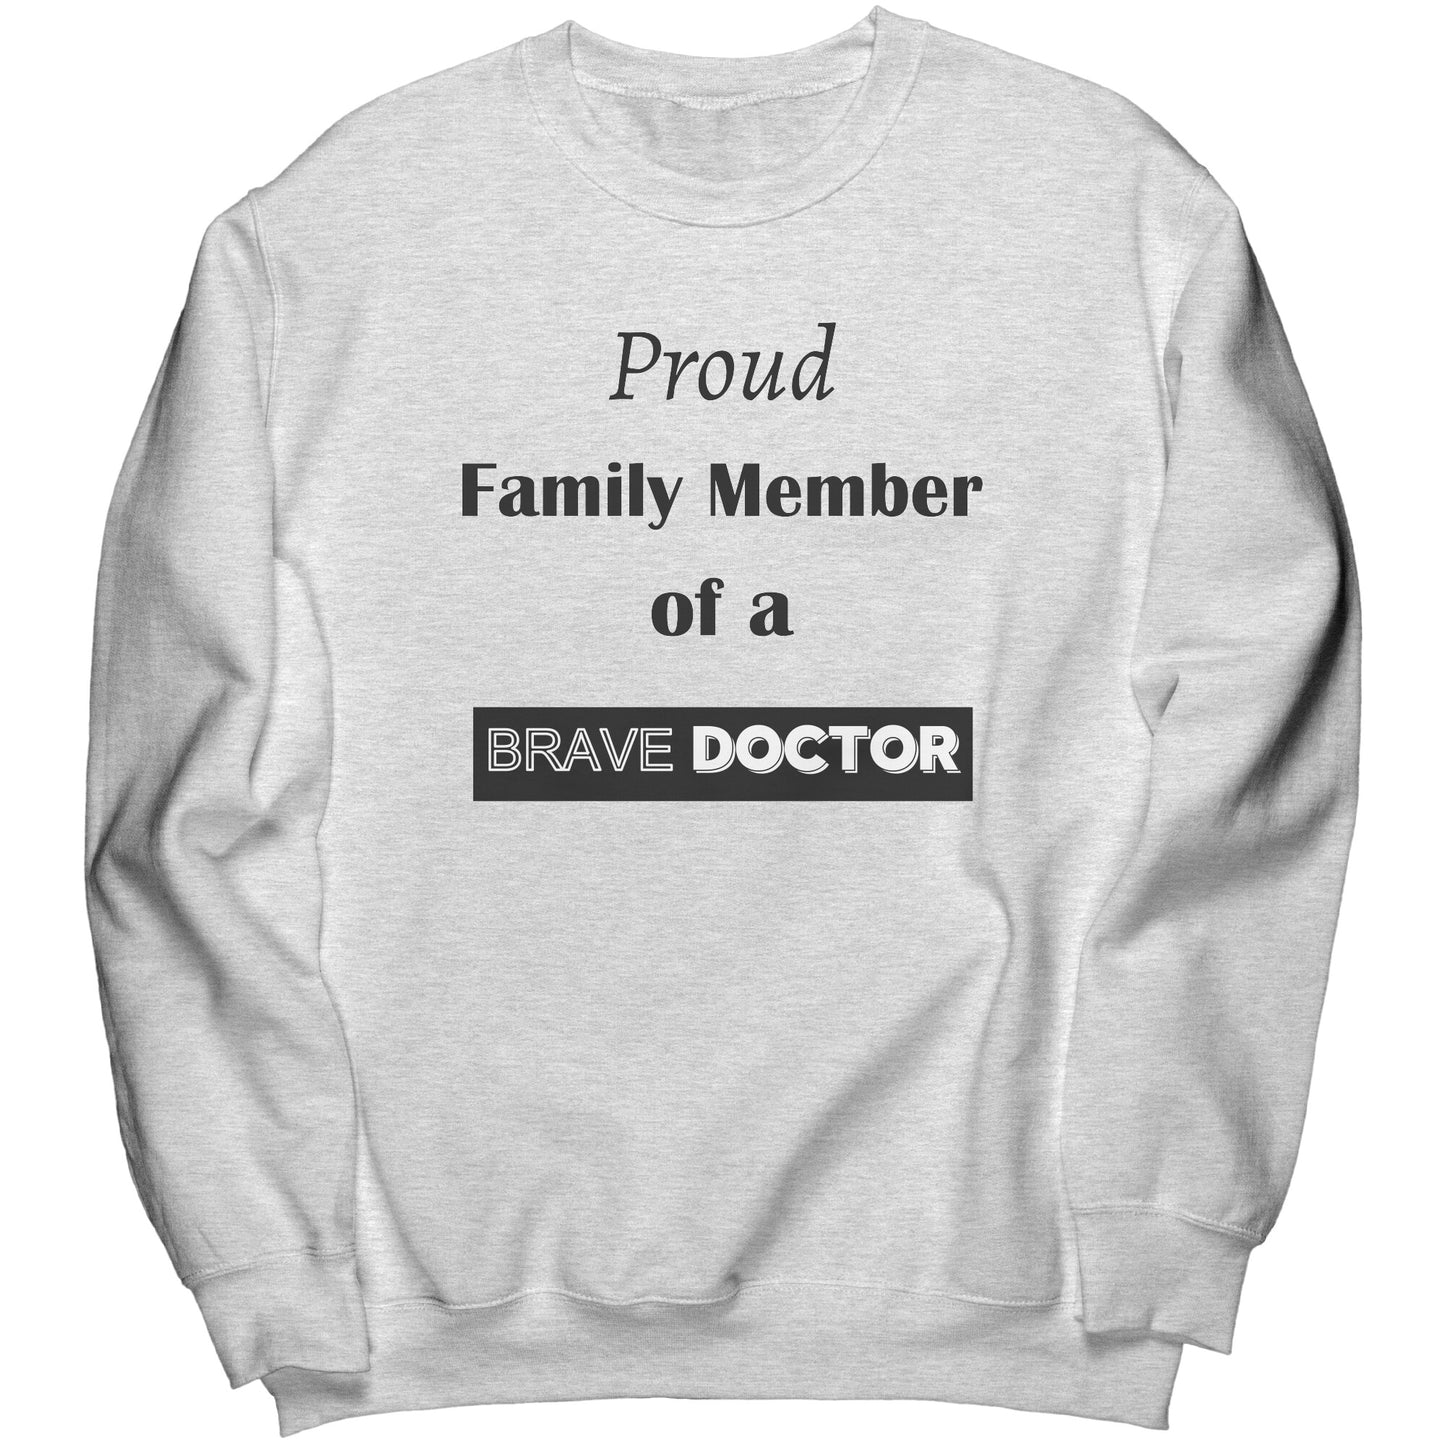 Proud Family Member of a Brave Doctor Lettering Sweatshirt - Signs and Seasons Gifts